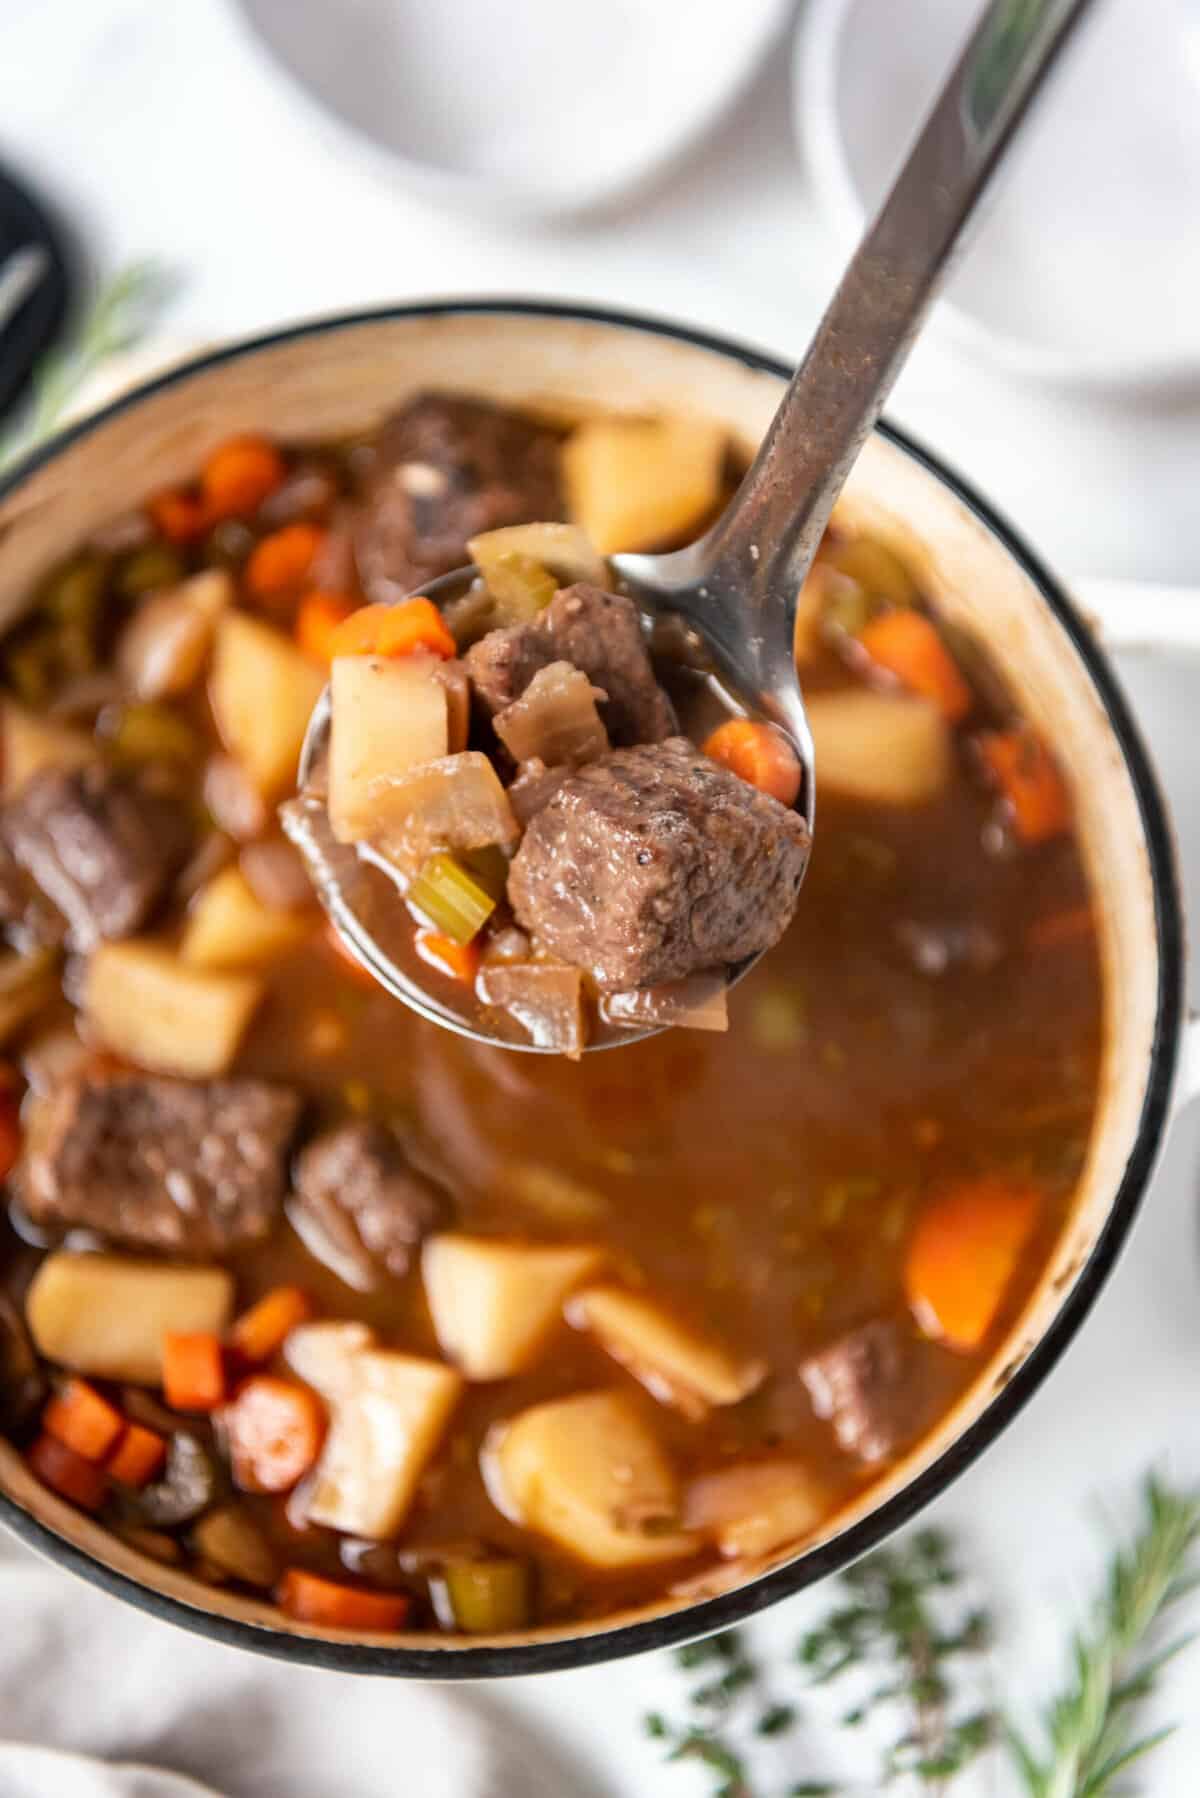 A ladleful of beef stew over the pot of stew.